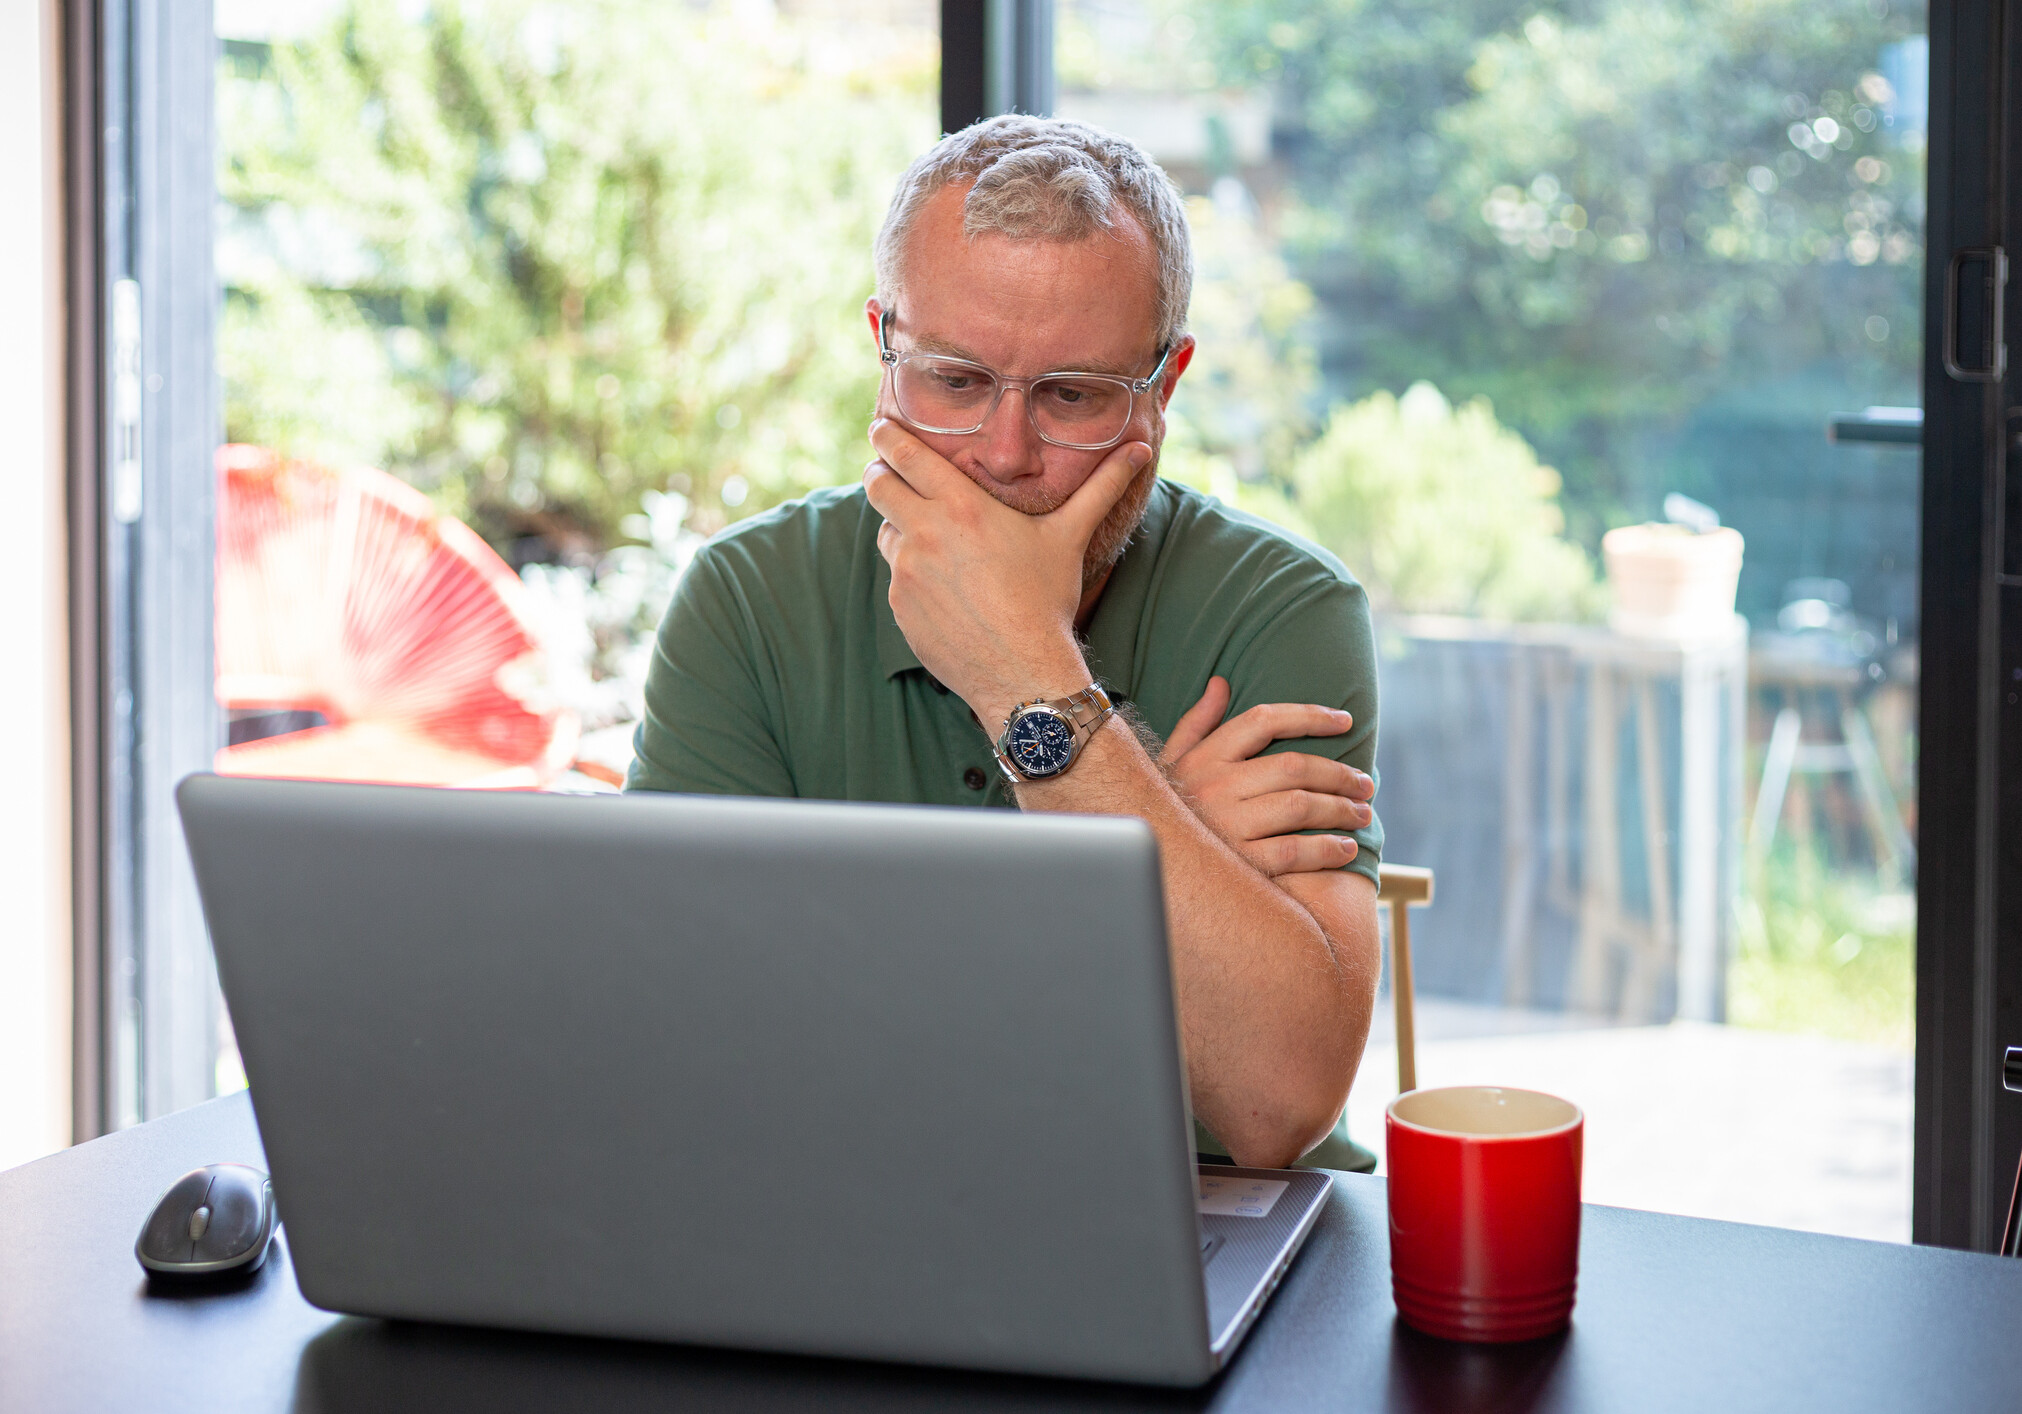 A worried man touches his face in an anxious way after looking at bad news on his laptop.